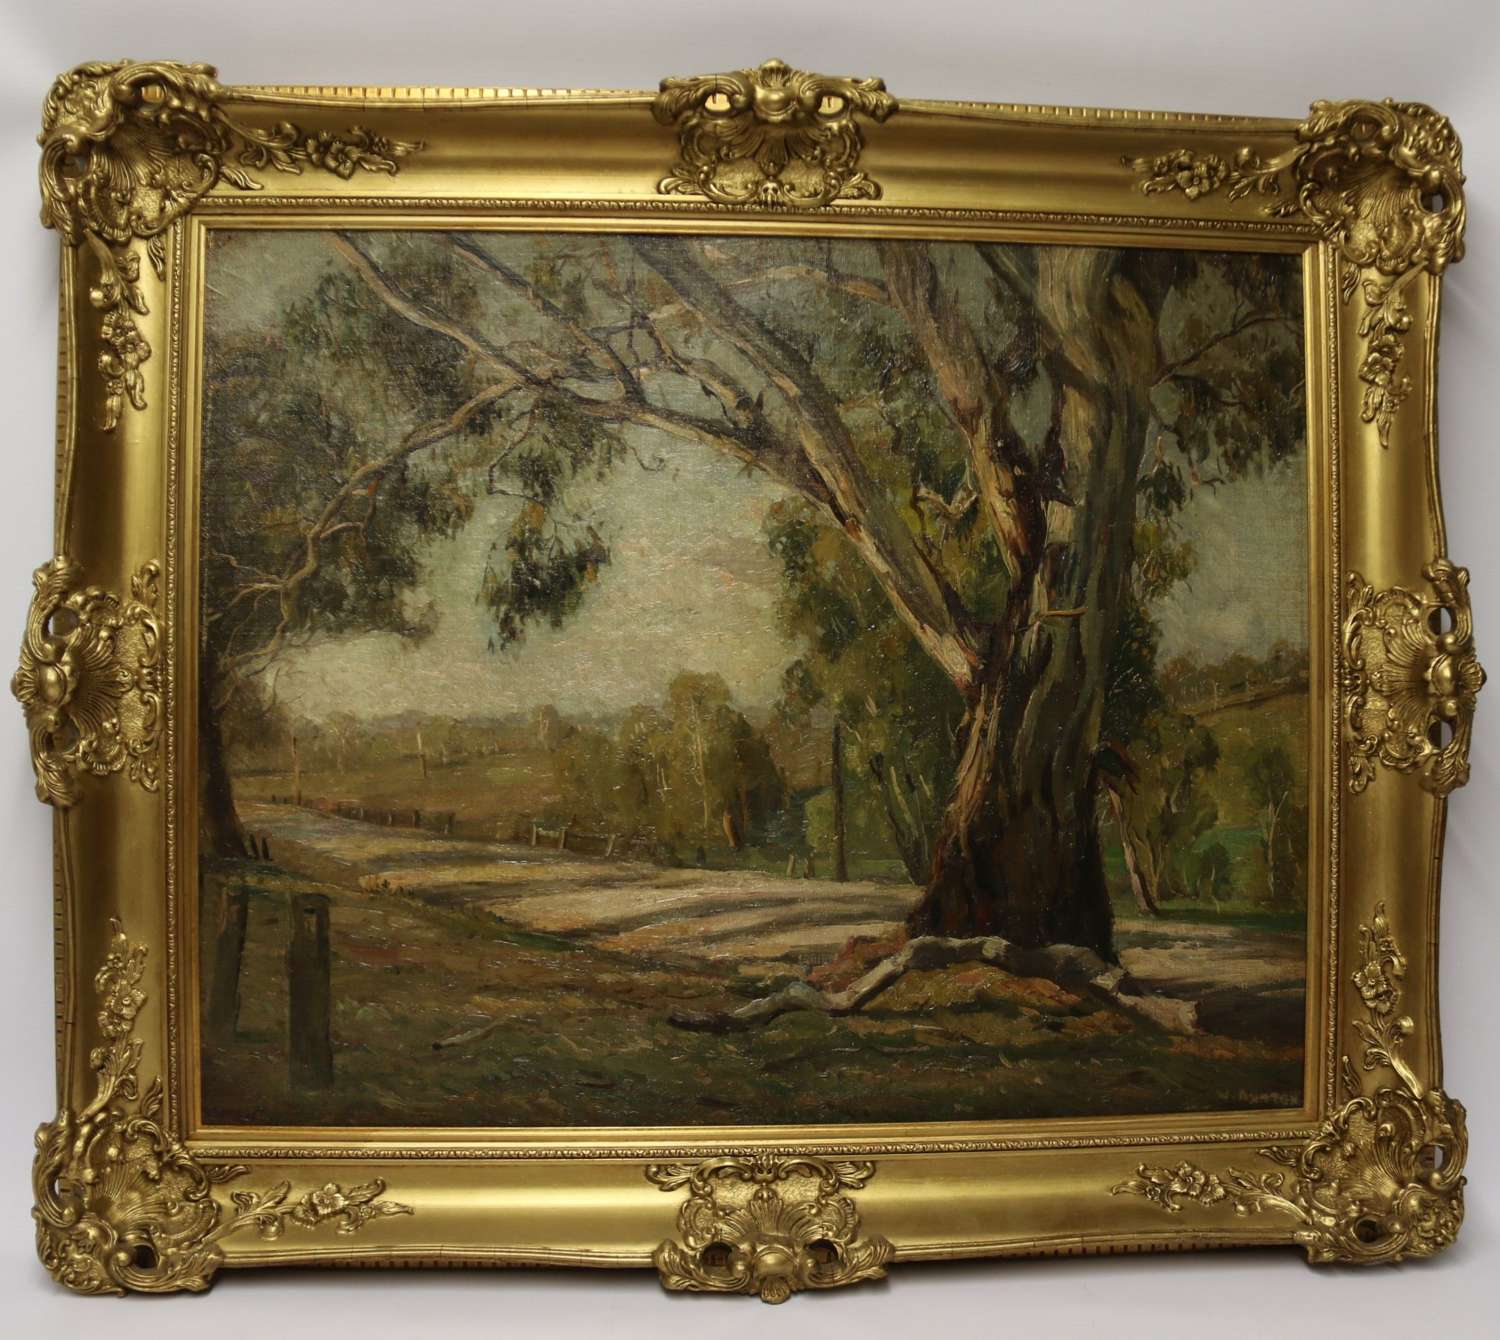 A Fine Oil Painting Of A Australian Rural View By Sir William Ashton,